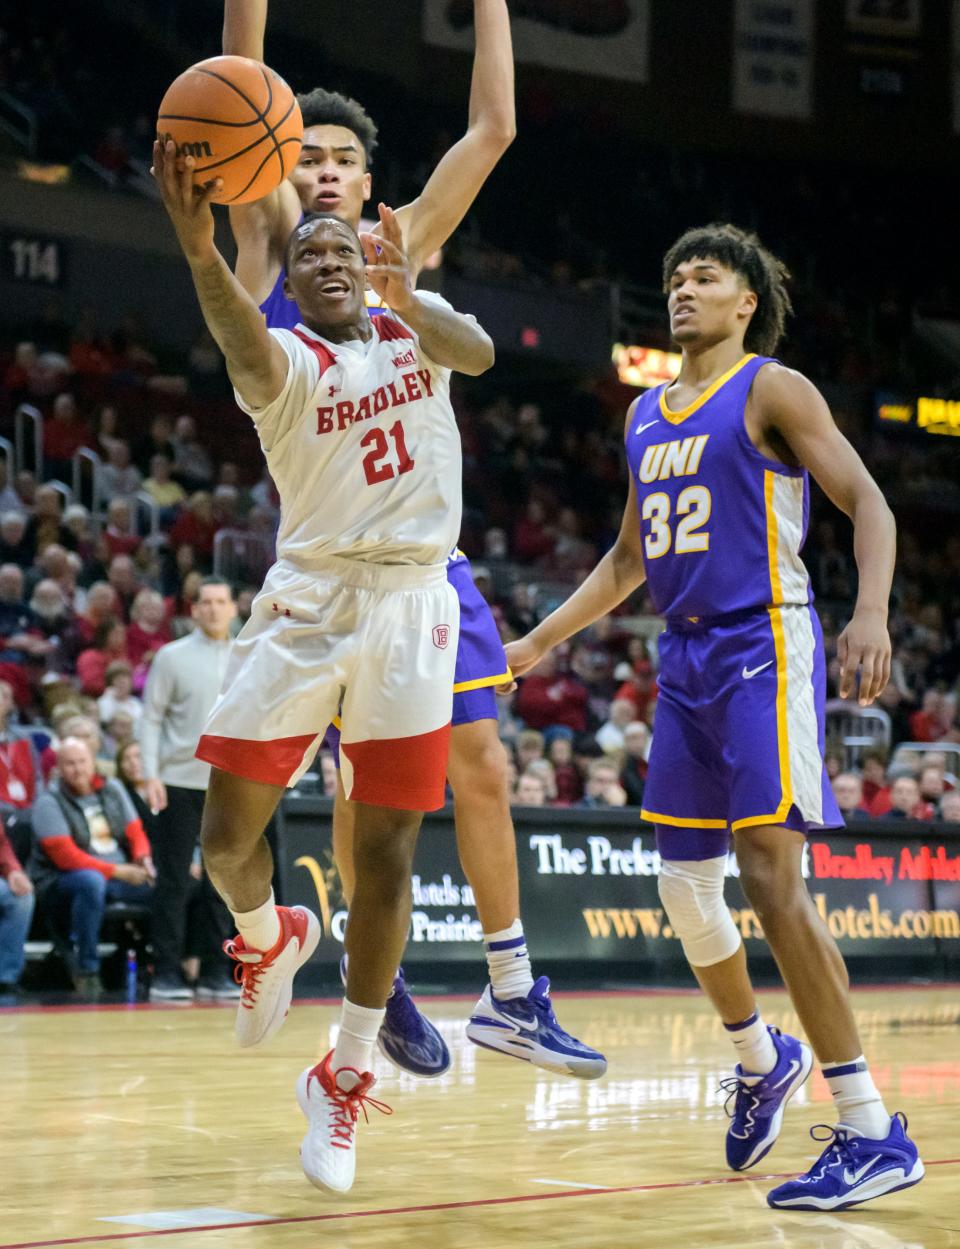 Bradley's Duke Deen (21) gets past Northern Iowa's Tytan Anderson (32) and Trey Campbell for a shot in the first half of their Missouri Valley Conference basketball opener Wednesday, Nov. 30, 2022 at Carver Arena. The Braves defeated the Panthers 68-53.